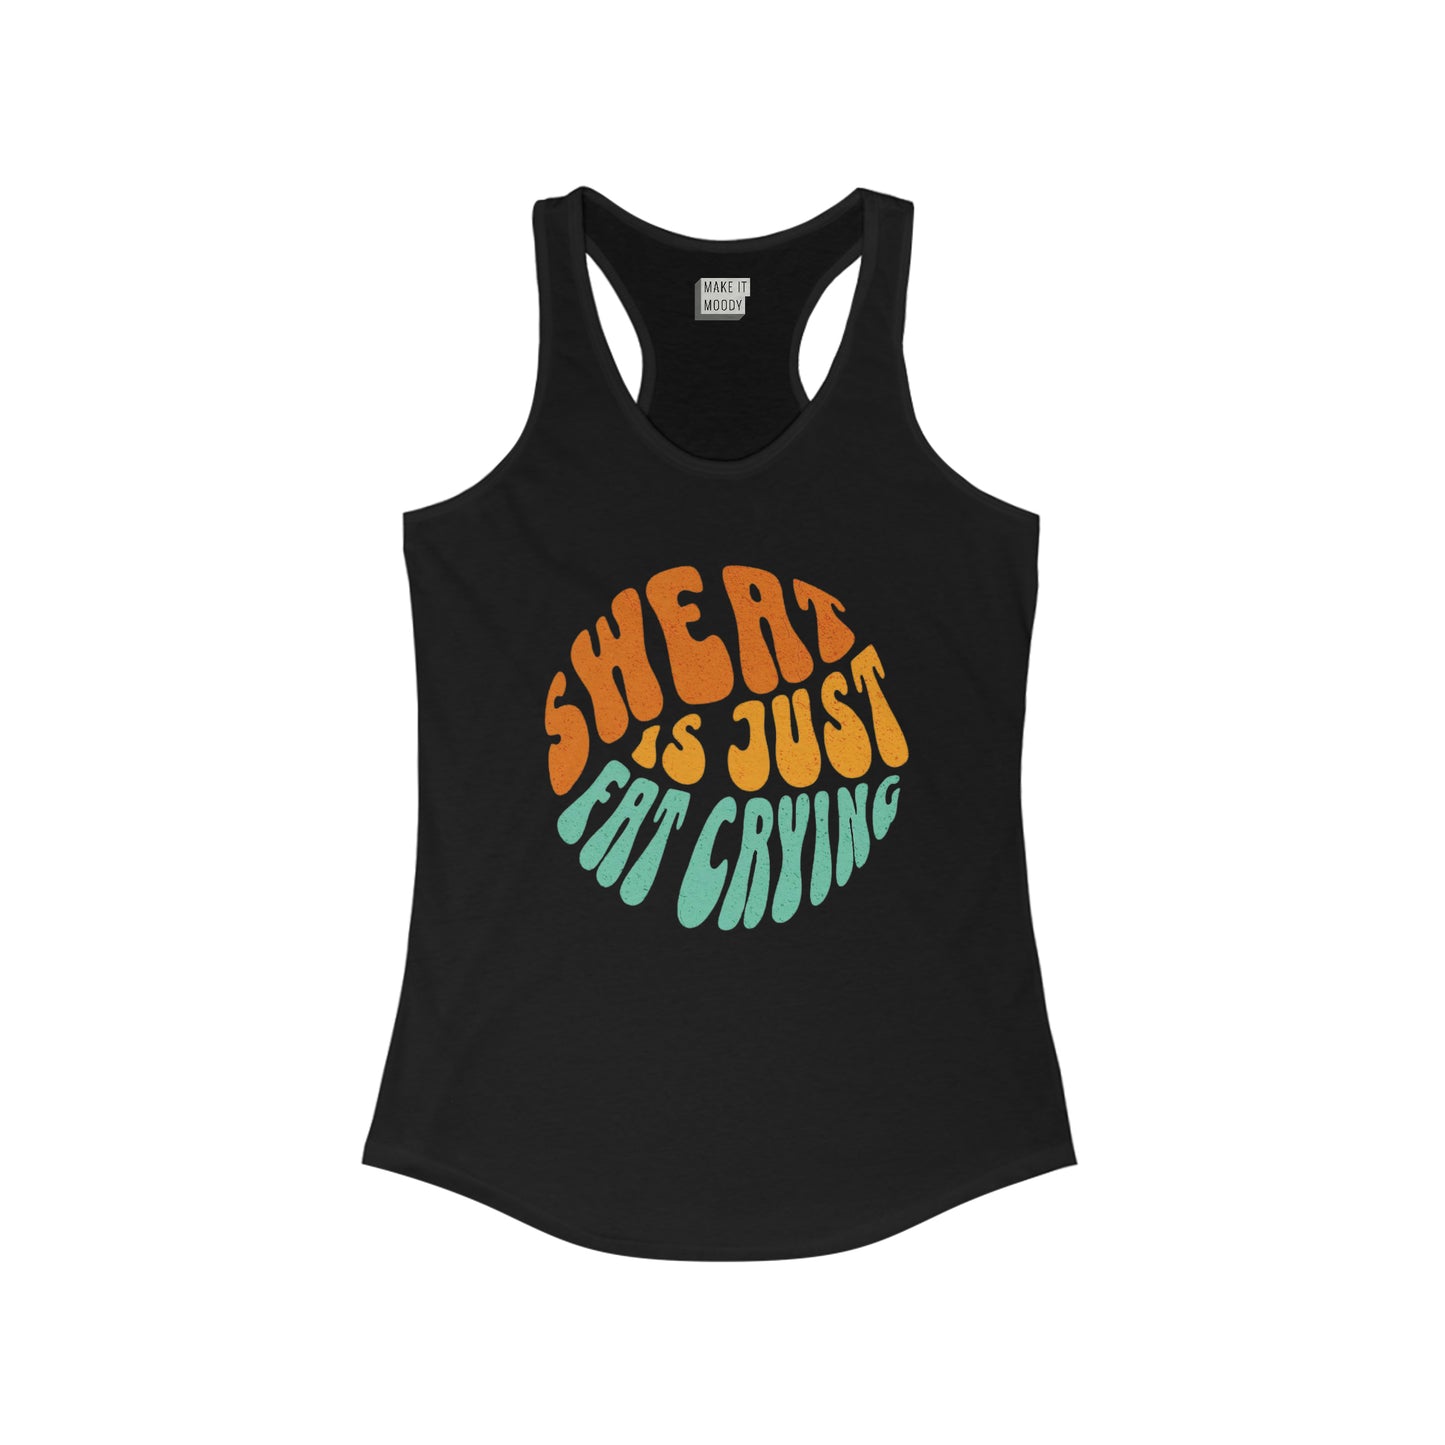 "Sweat Is Just Fat Crying" Gym Tank